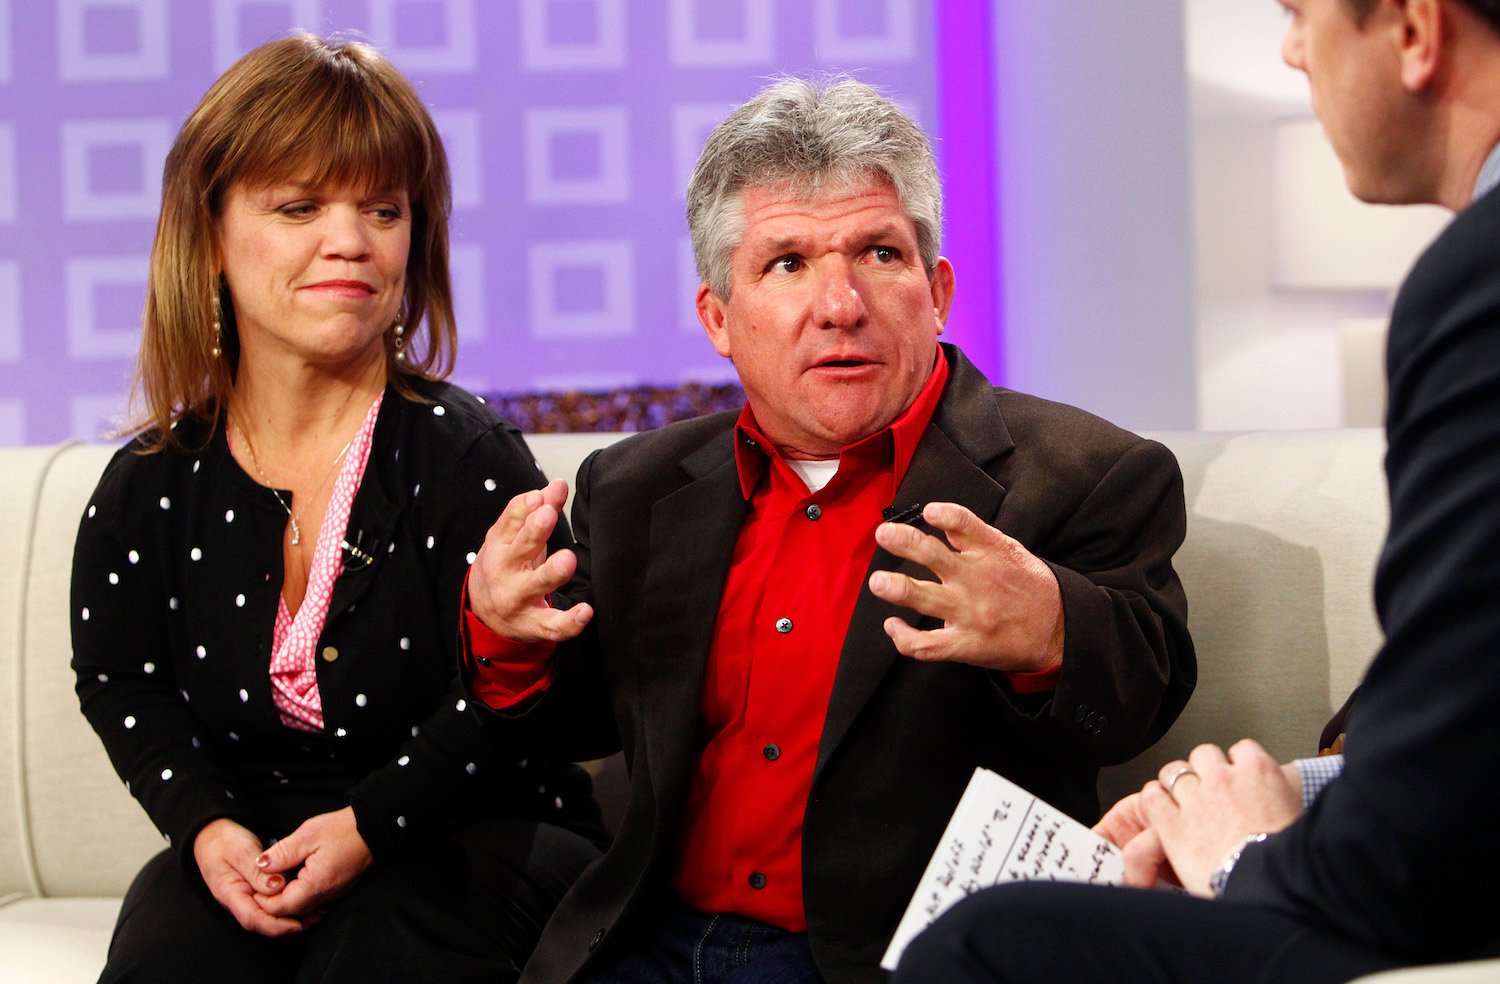 ‘Little People, Big World’: Caryn Chandler Is ‘Disappointed’ in Delayed Engagement Plans, Matt Roloff Says